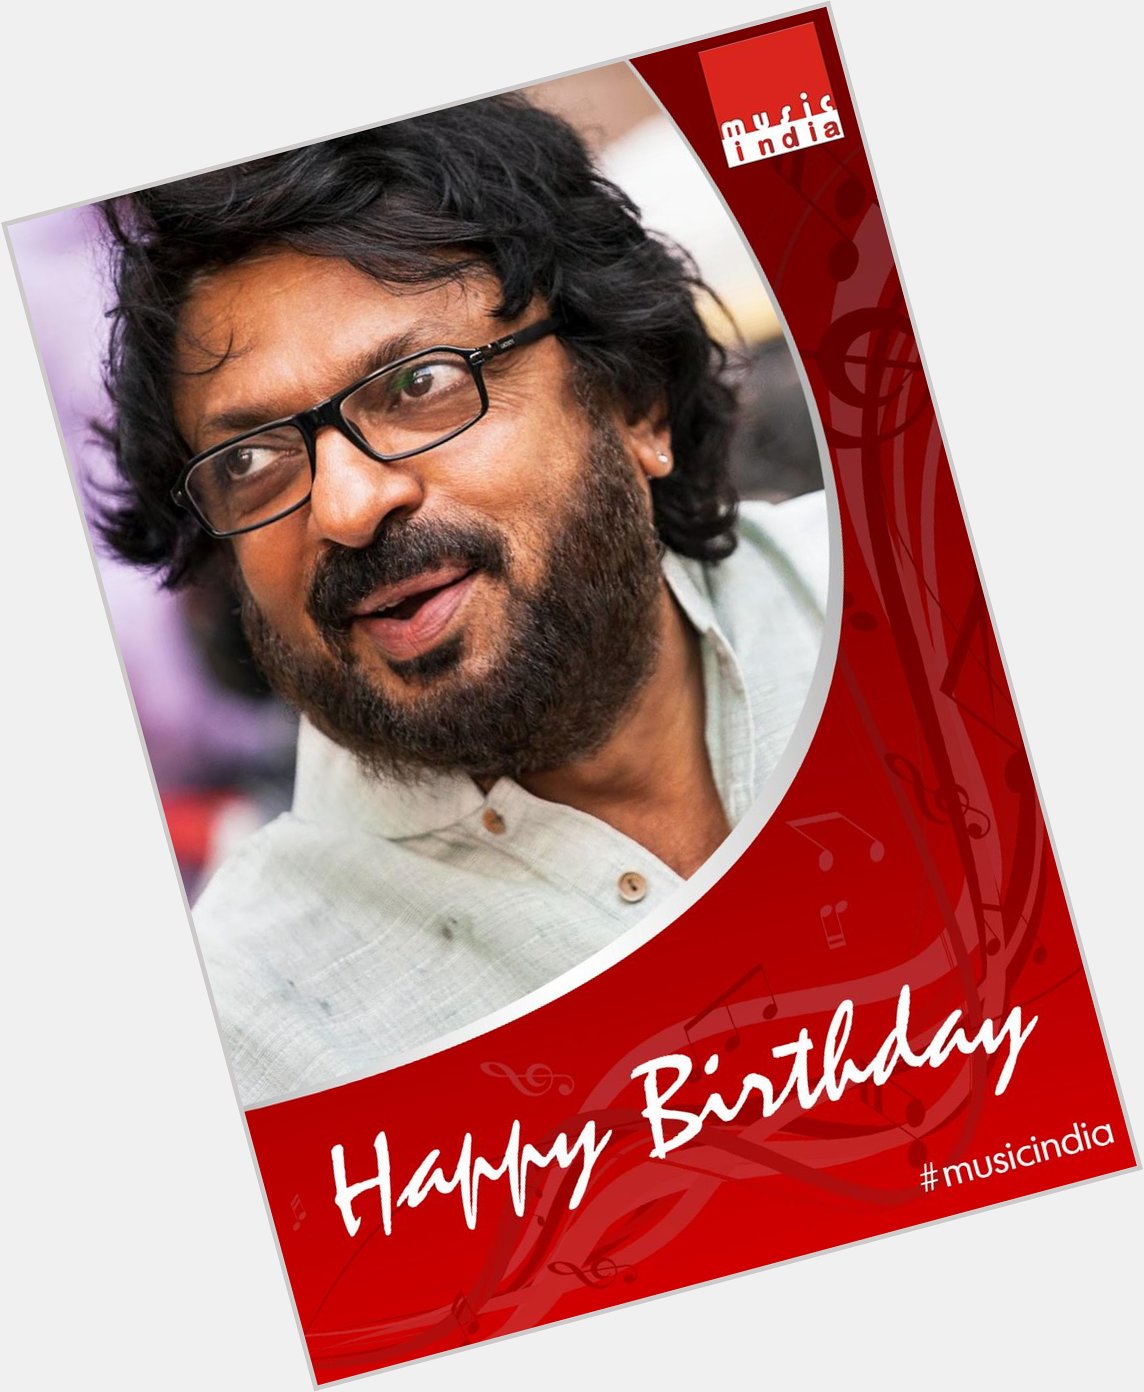  wishes the Director with the colorful Eye, Sanjay Leela Bhansali, a very Happy Birthday. 